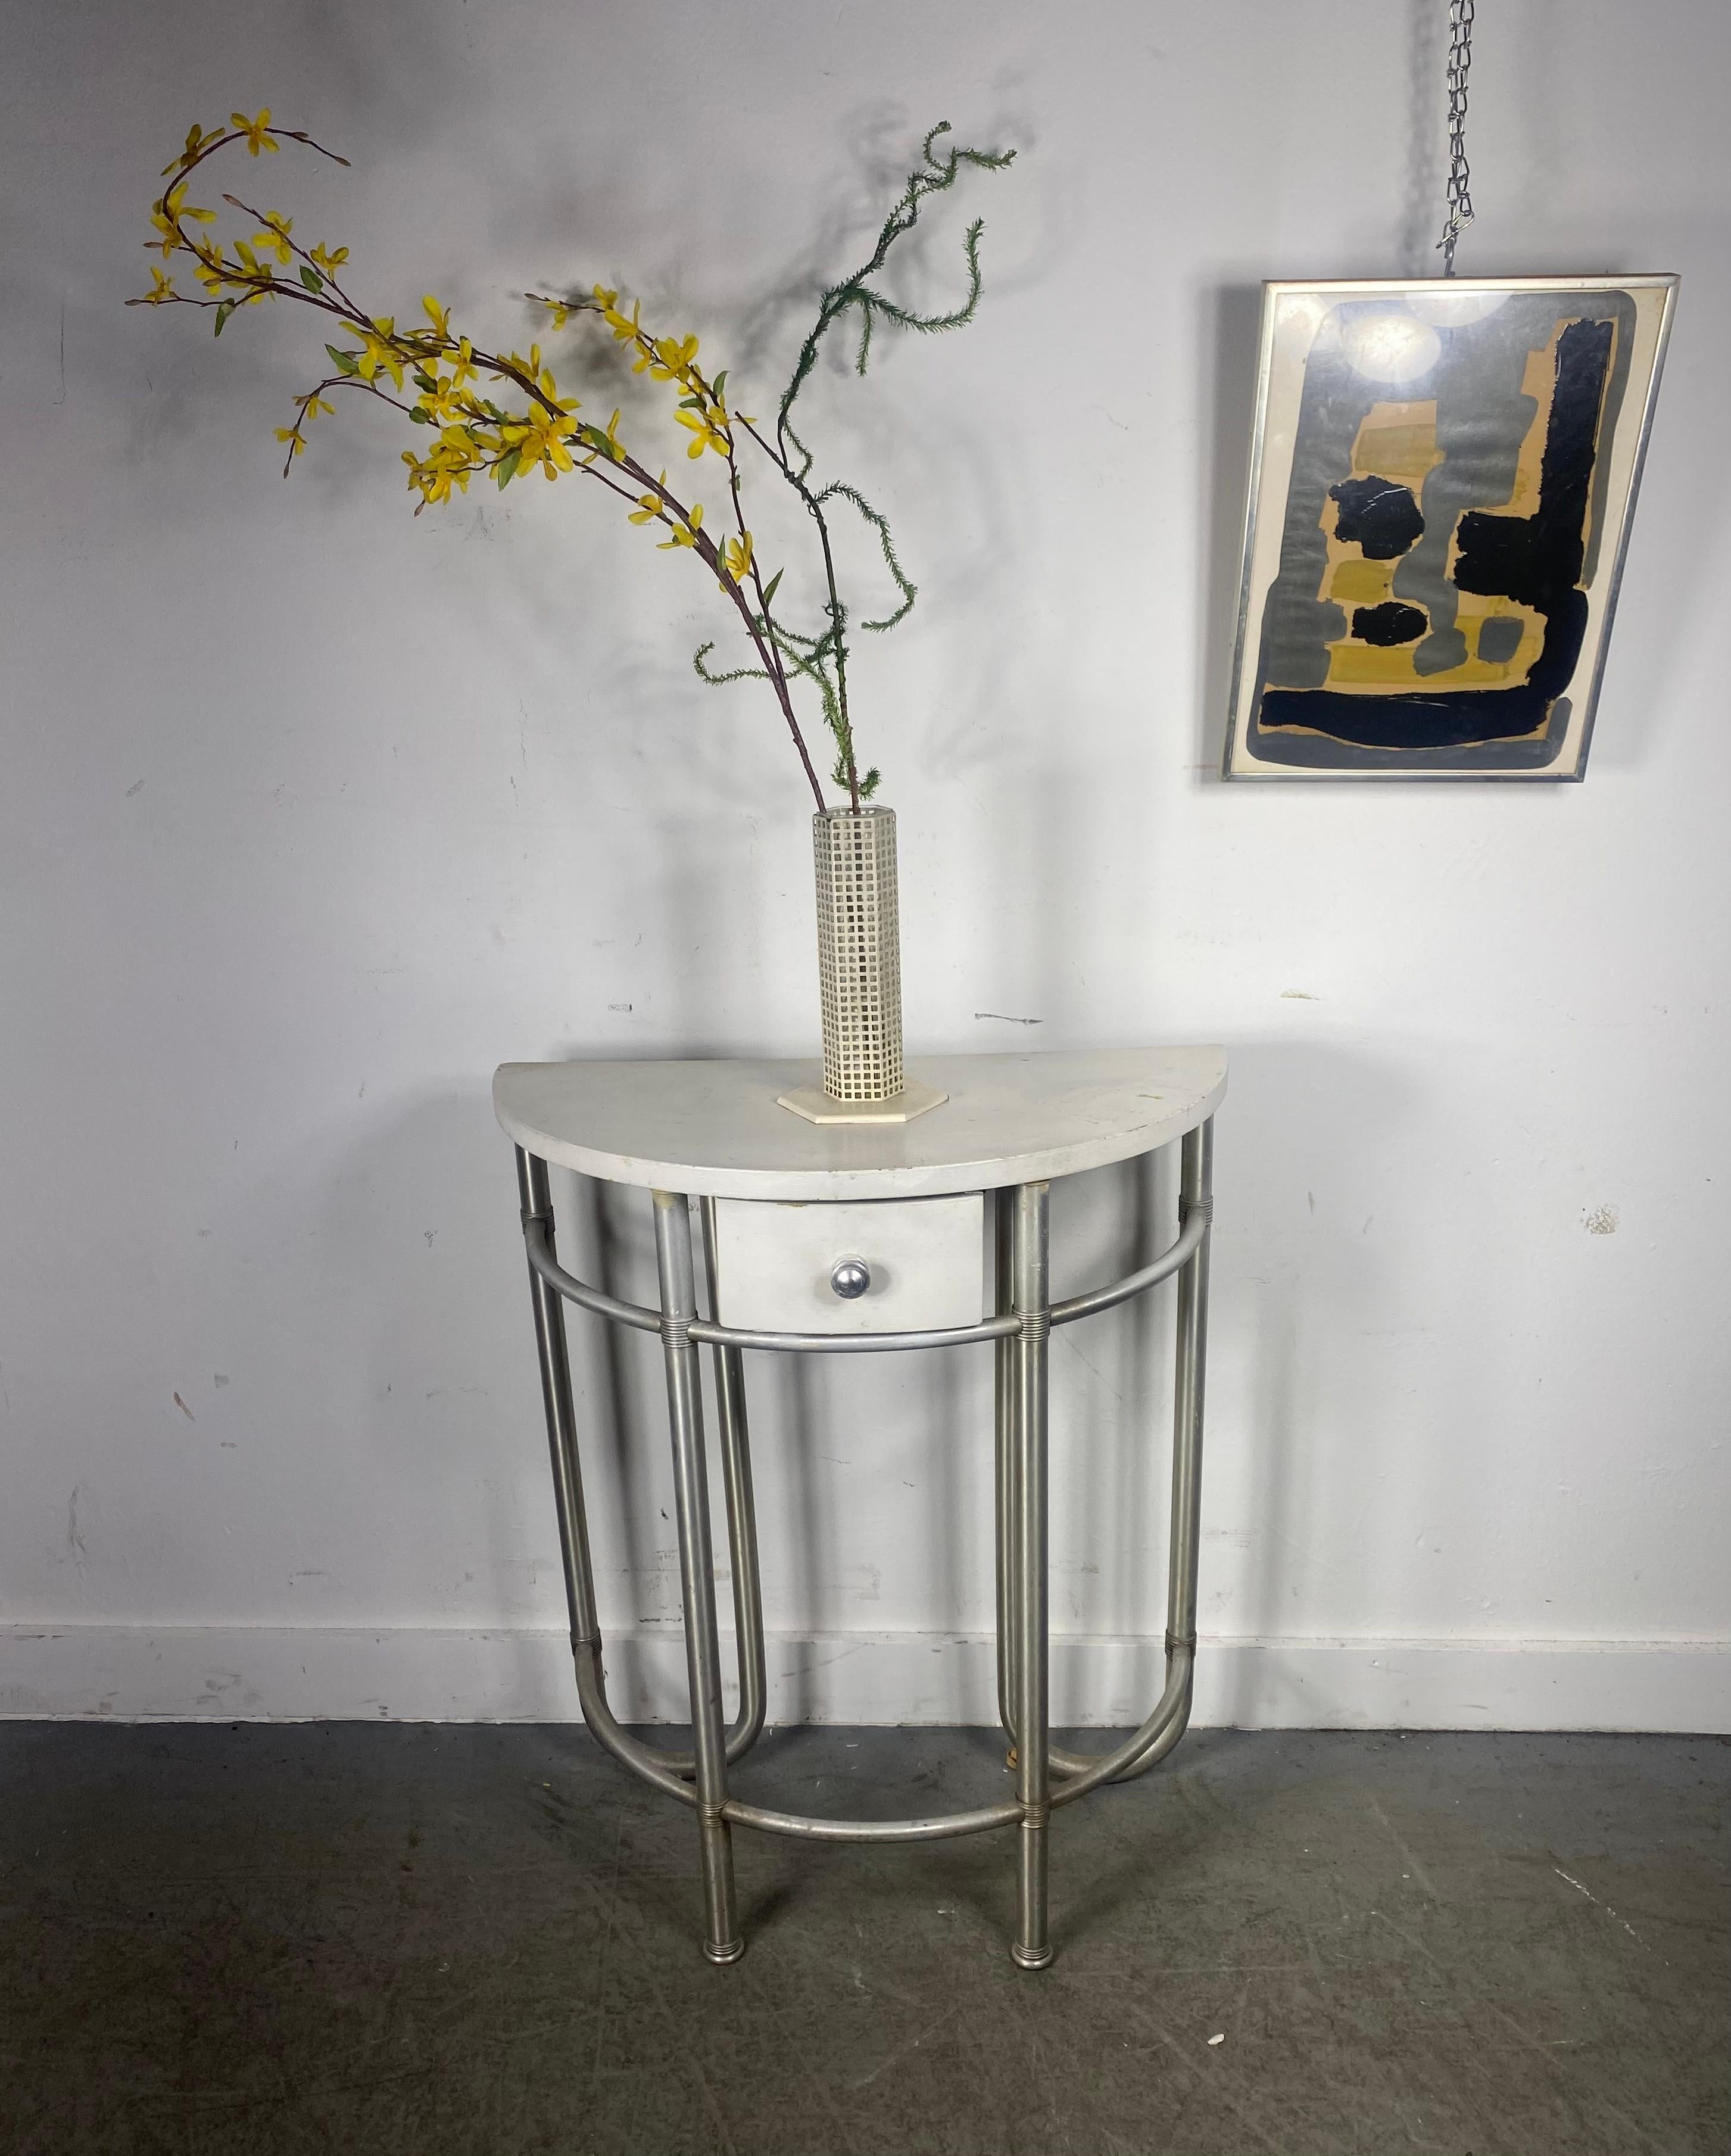 Josef Hoffmann, Flower vase in metal and glass.

This iconic flowers vase, originally designed in the early 1900s, this specimen was reissued by the Bieffeplast company in the 1980s and bears the authenticity label on the bottom.. minor chip to